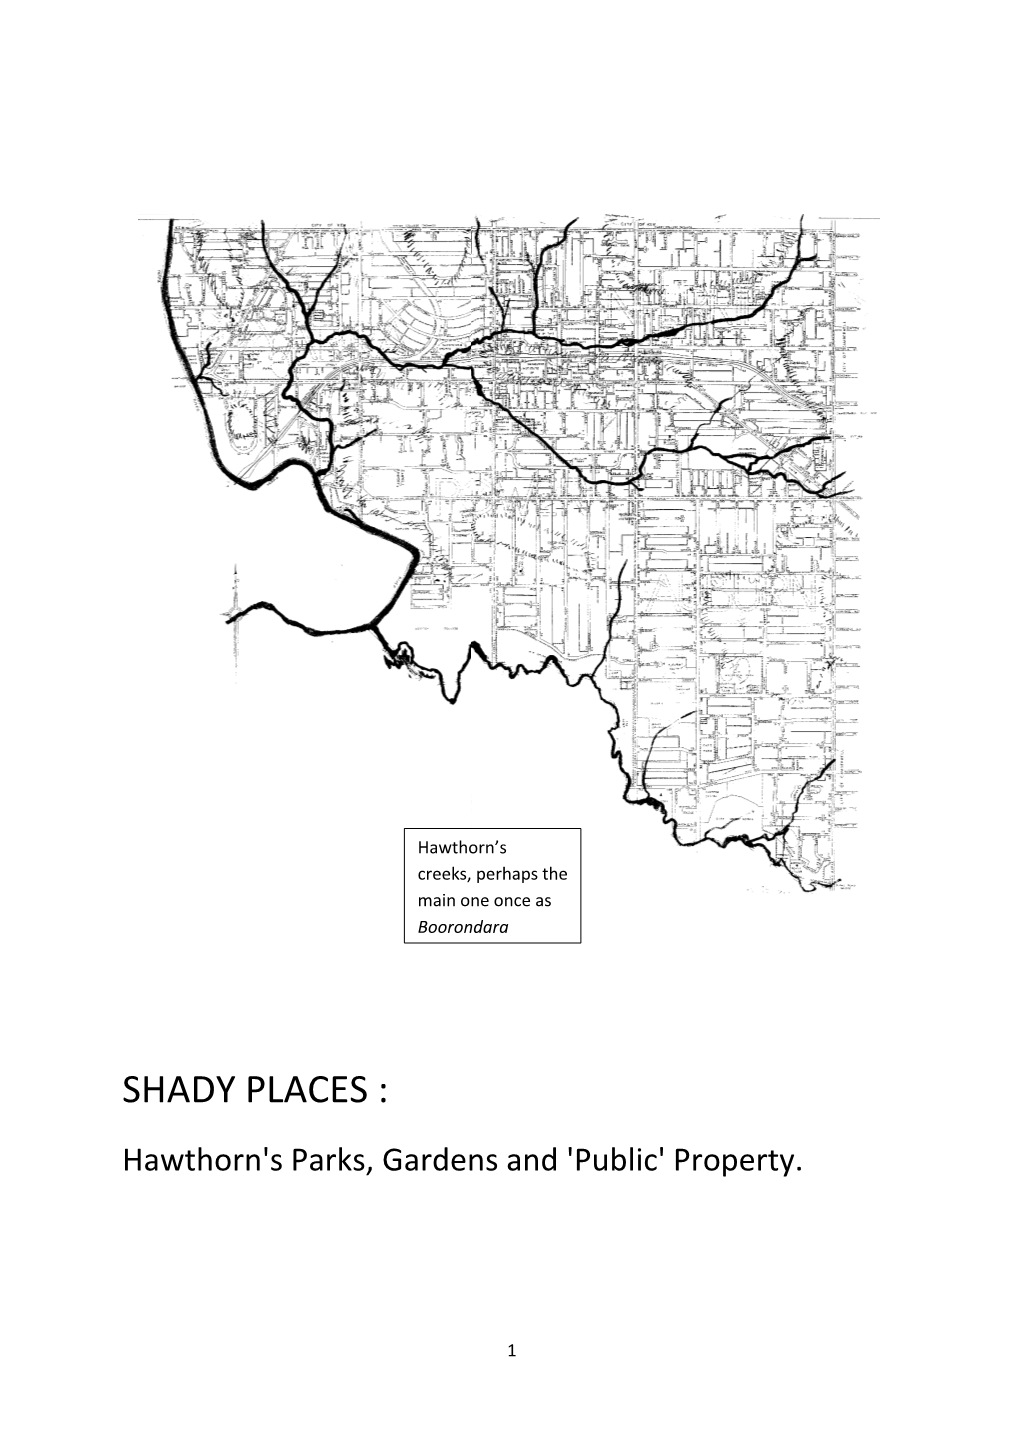 SHADY PLACES : Hawthorn's Parks, Gardens and 'Public' Property